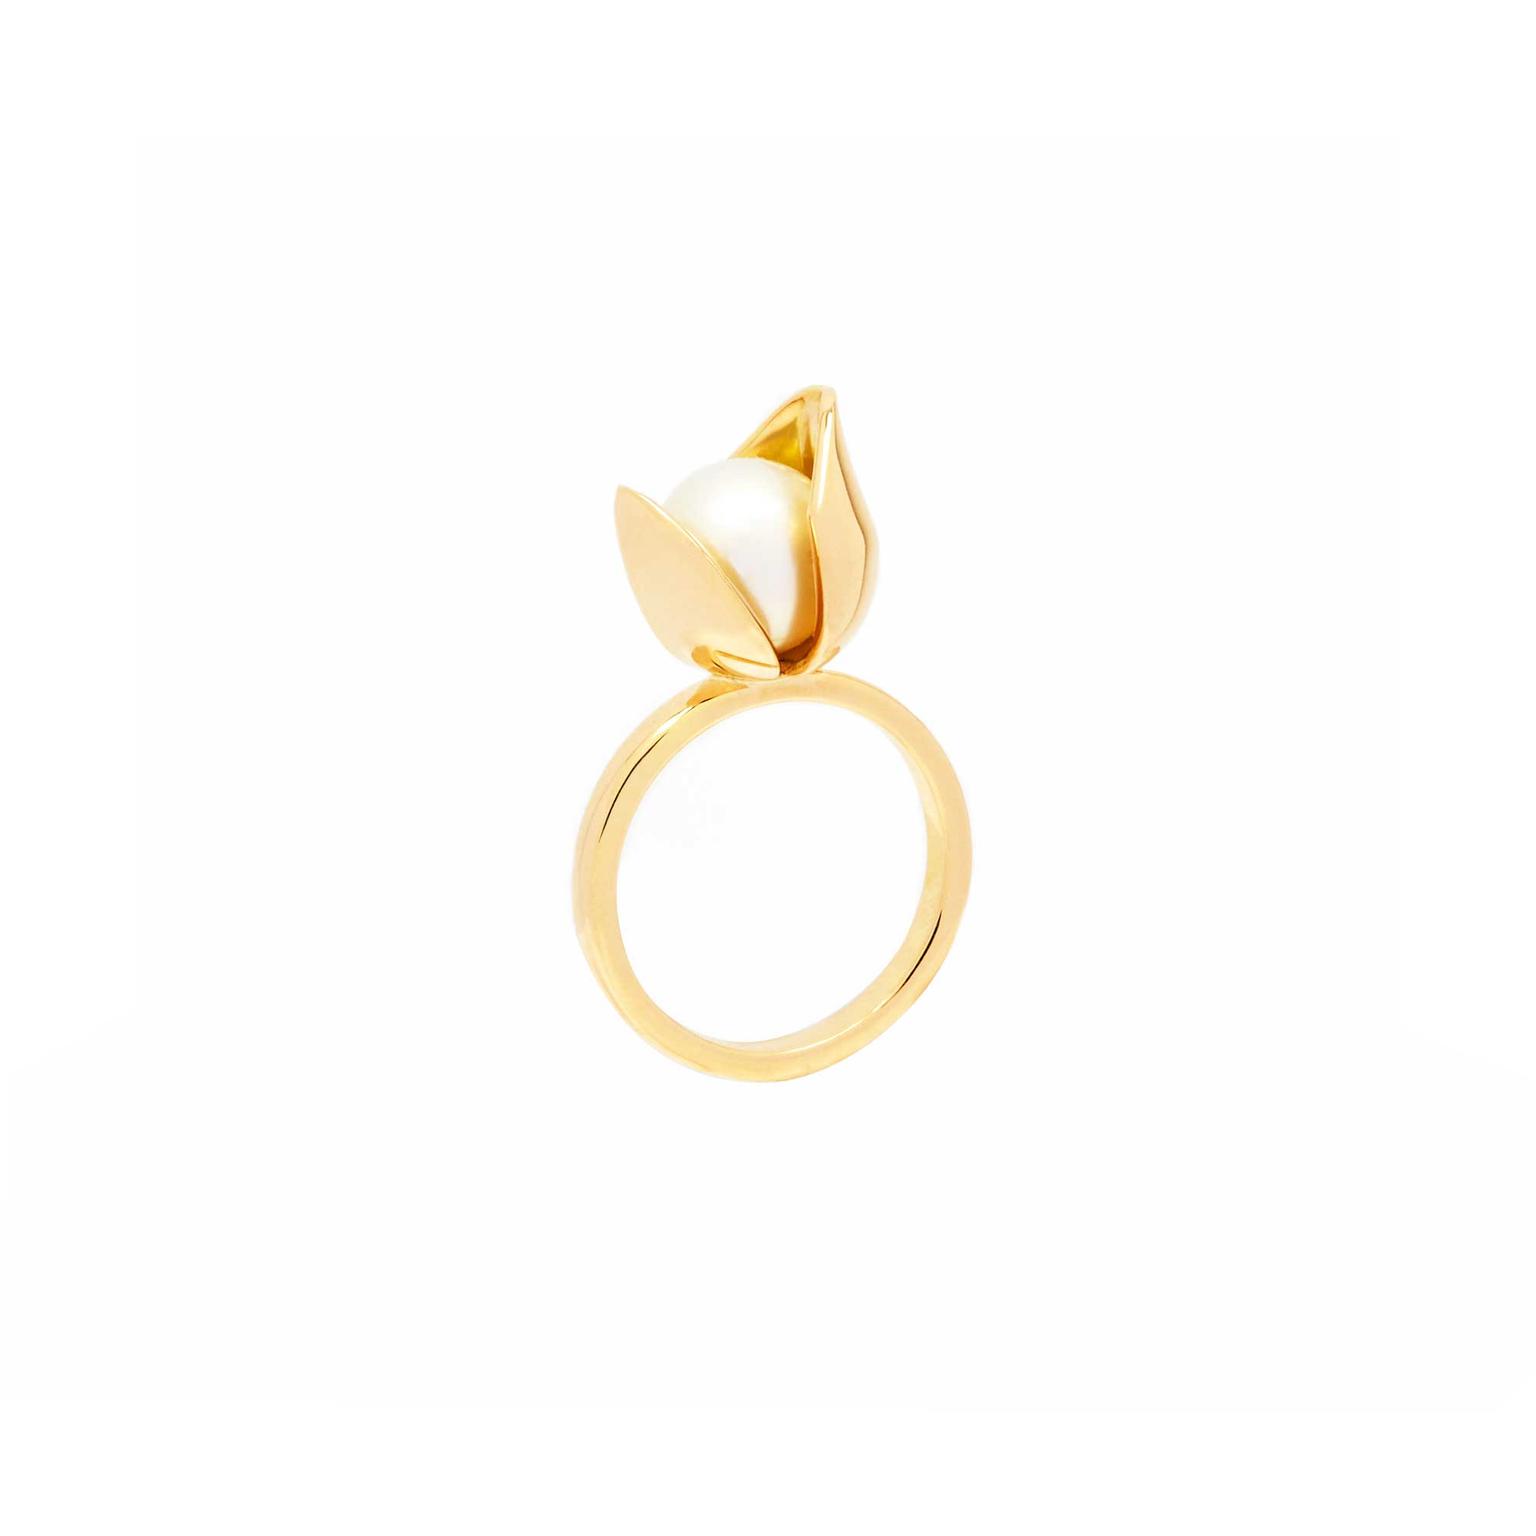 Tessa Packard Orchid ring white